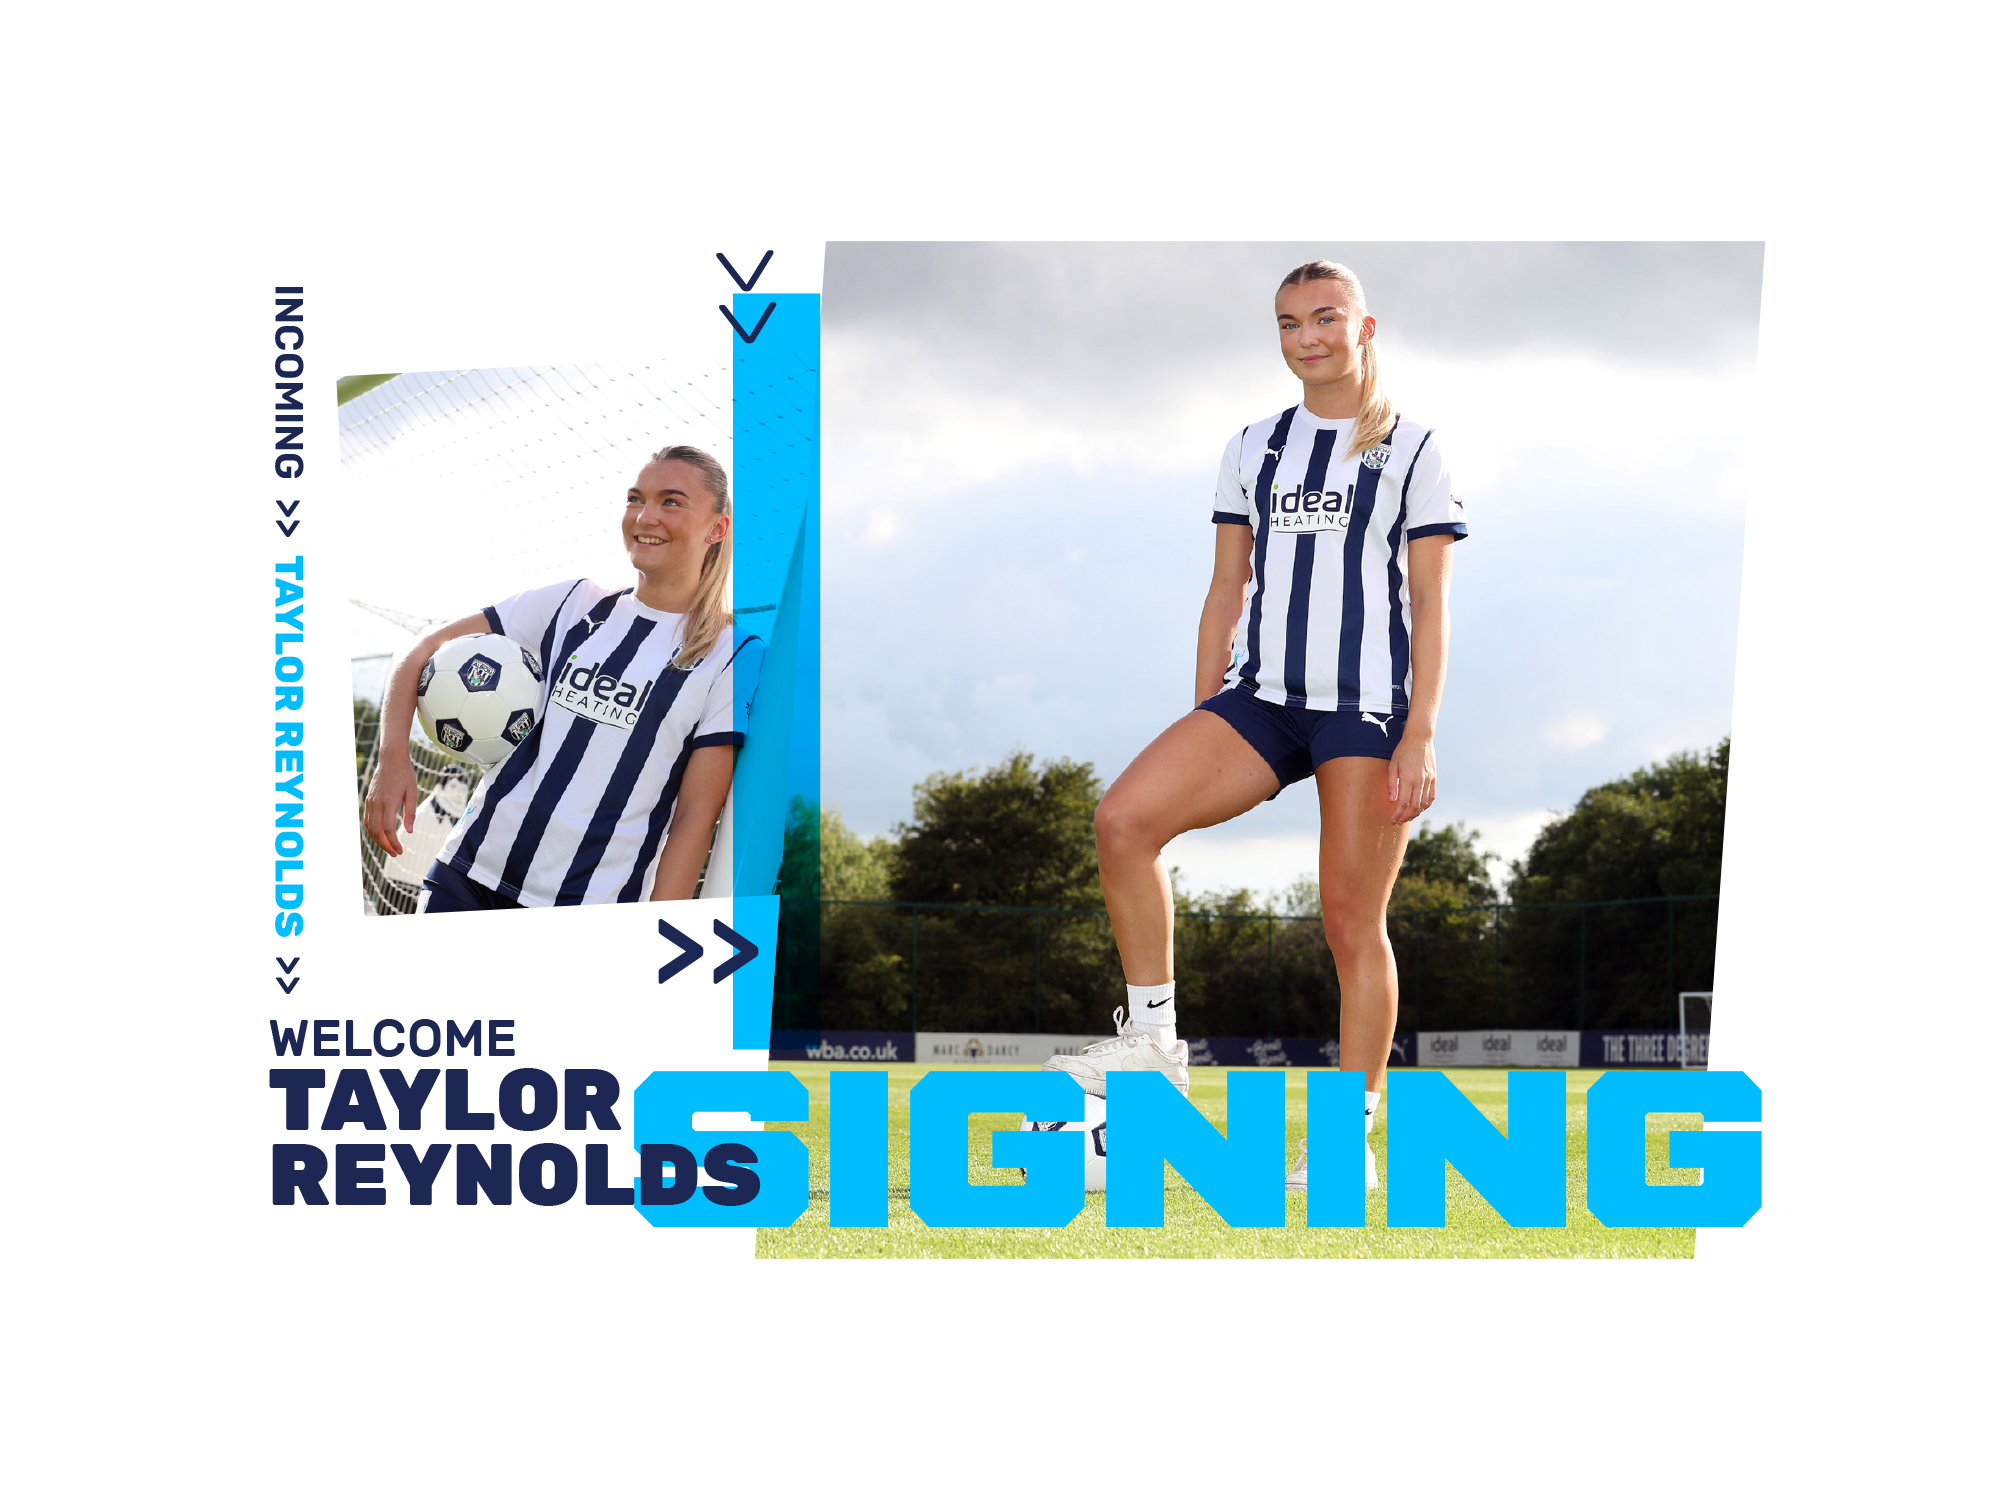 Taylor Reynolds signs for West Bromwich Albion Women